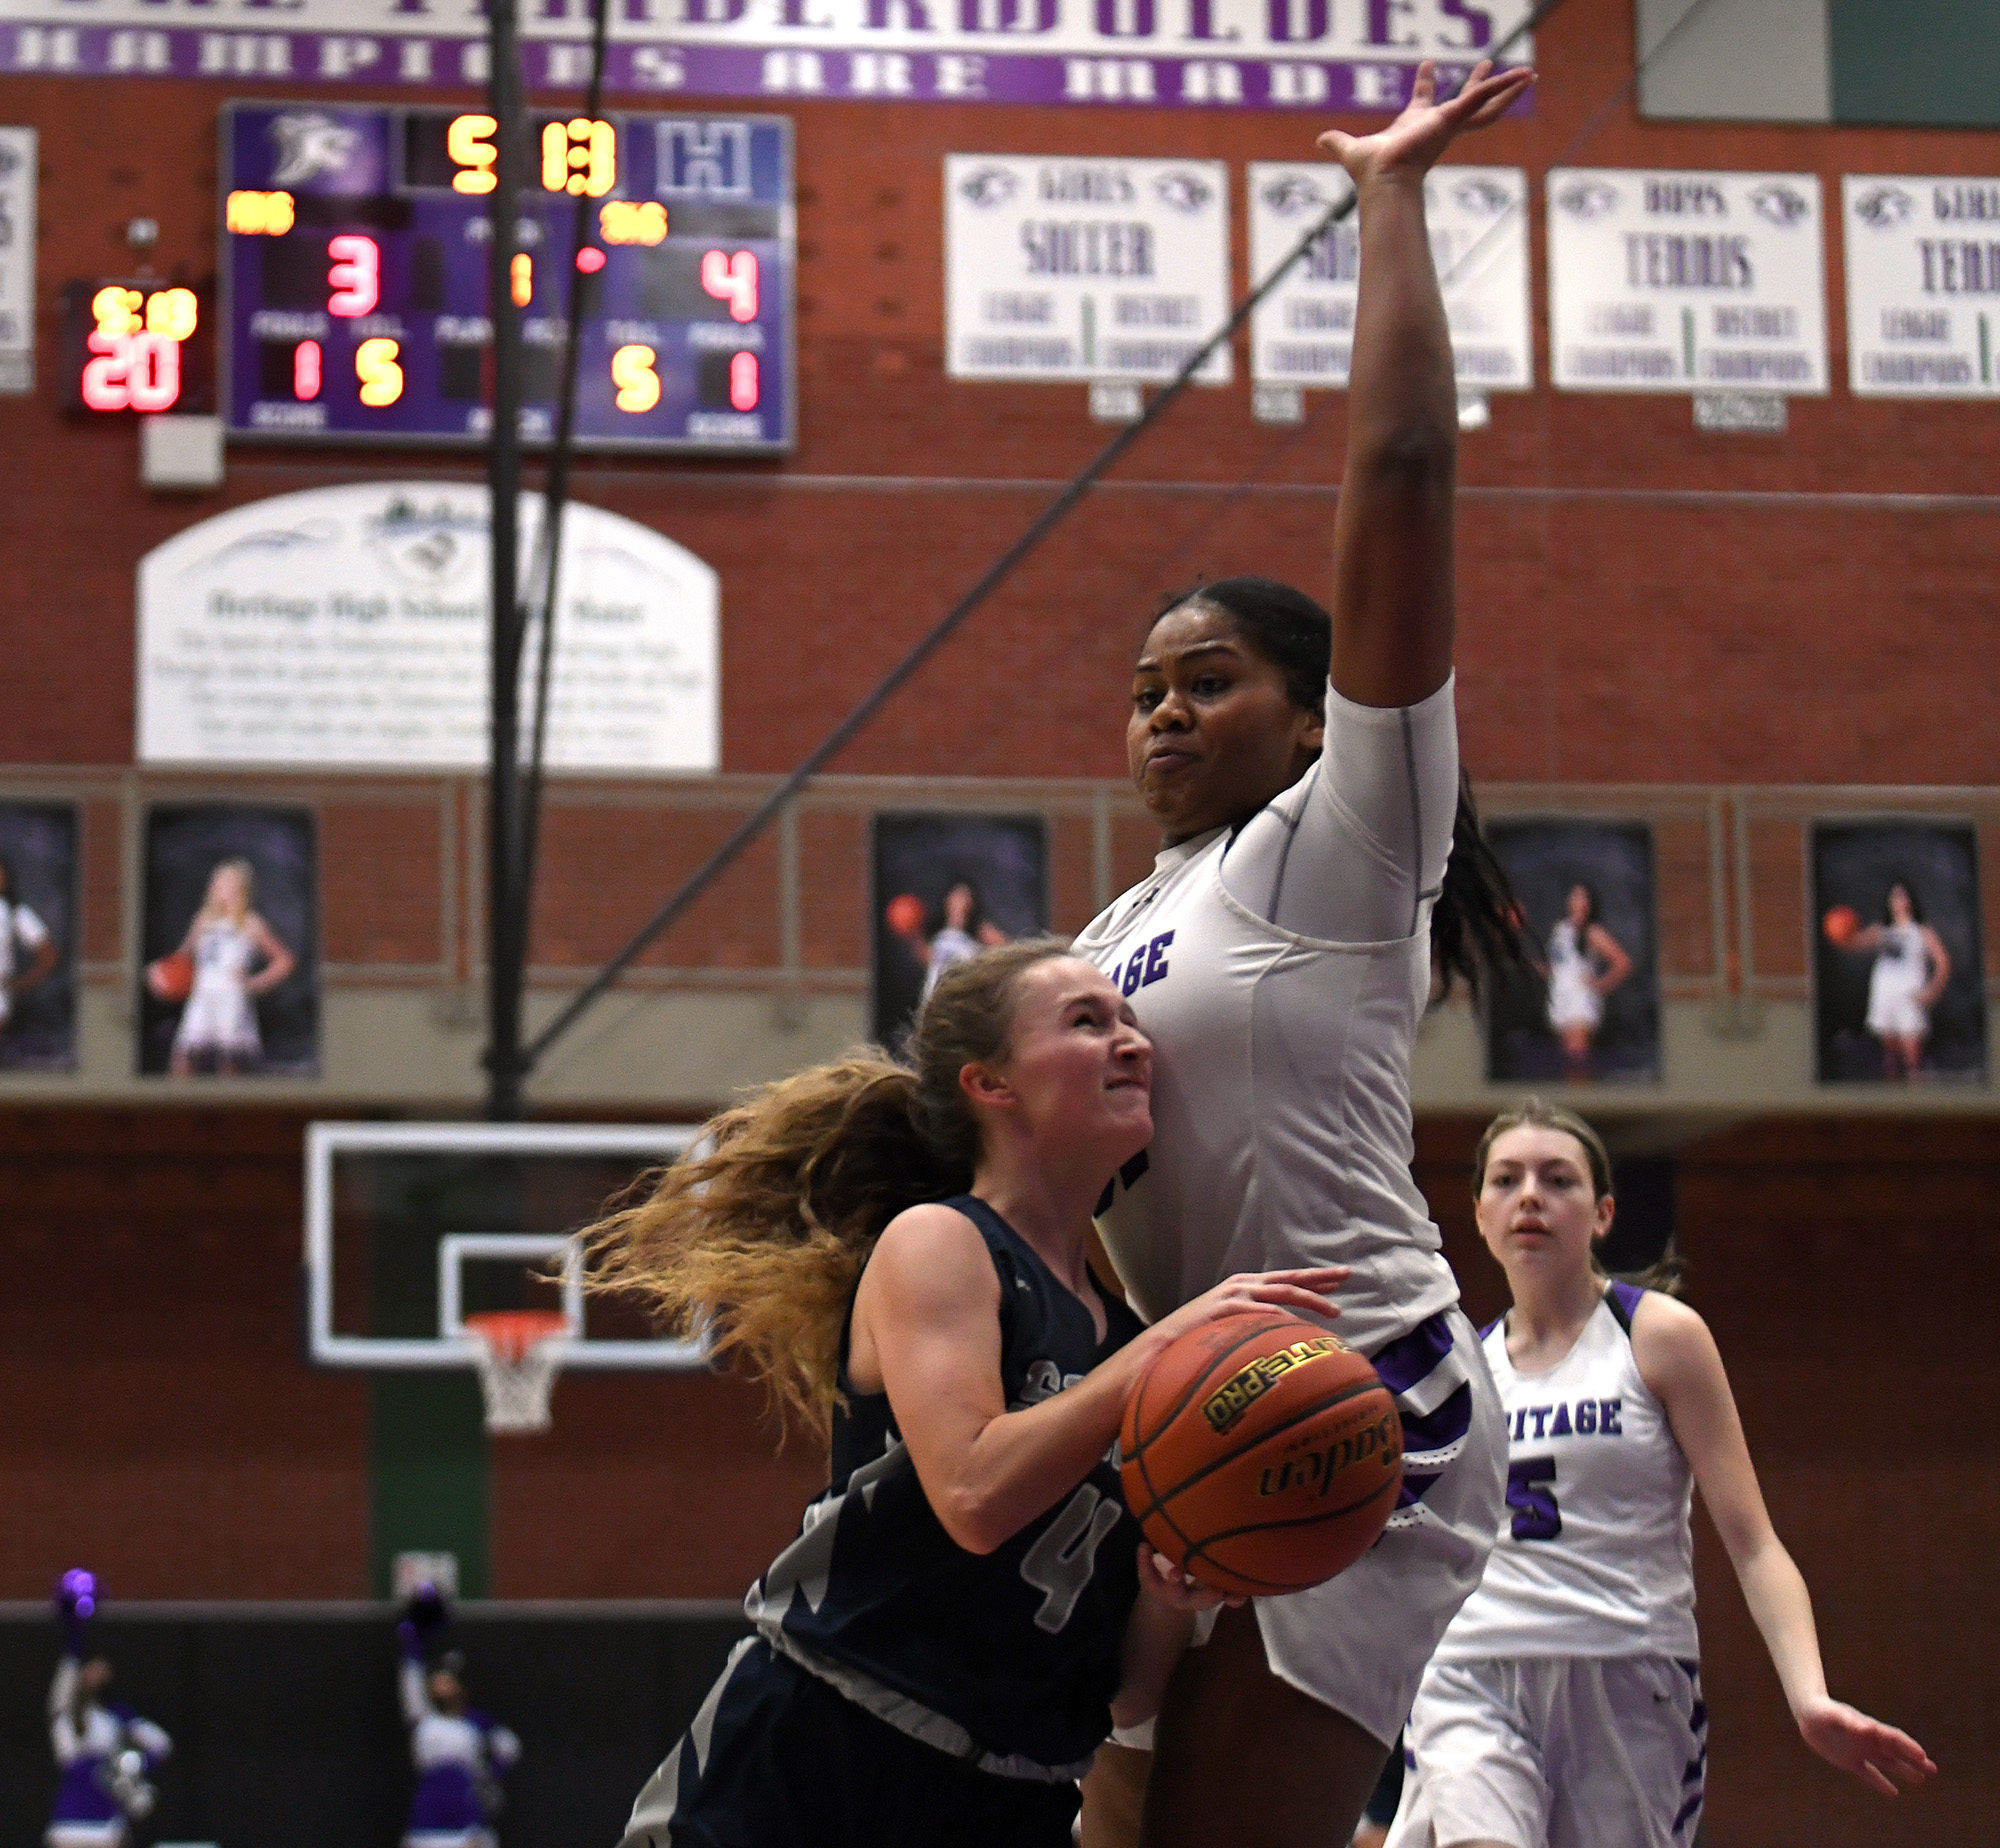 Skyview sophomore Samantha Groesbeck looks to shoot the ball under pressure from Herigage junior Keanna Salavea on Tuesday, Jan. 4, 2022, during the Storm’s 66-40 win against the Timberwolves at Heritage High School.